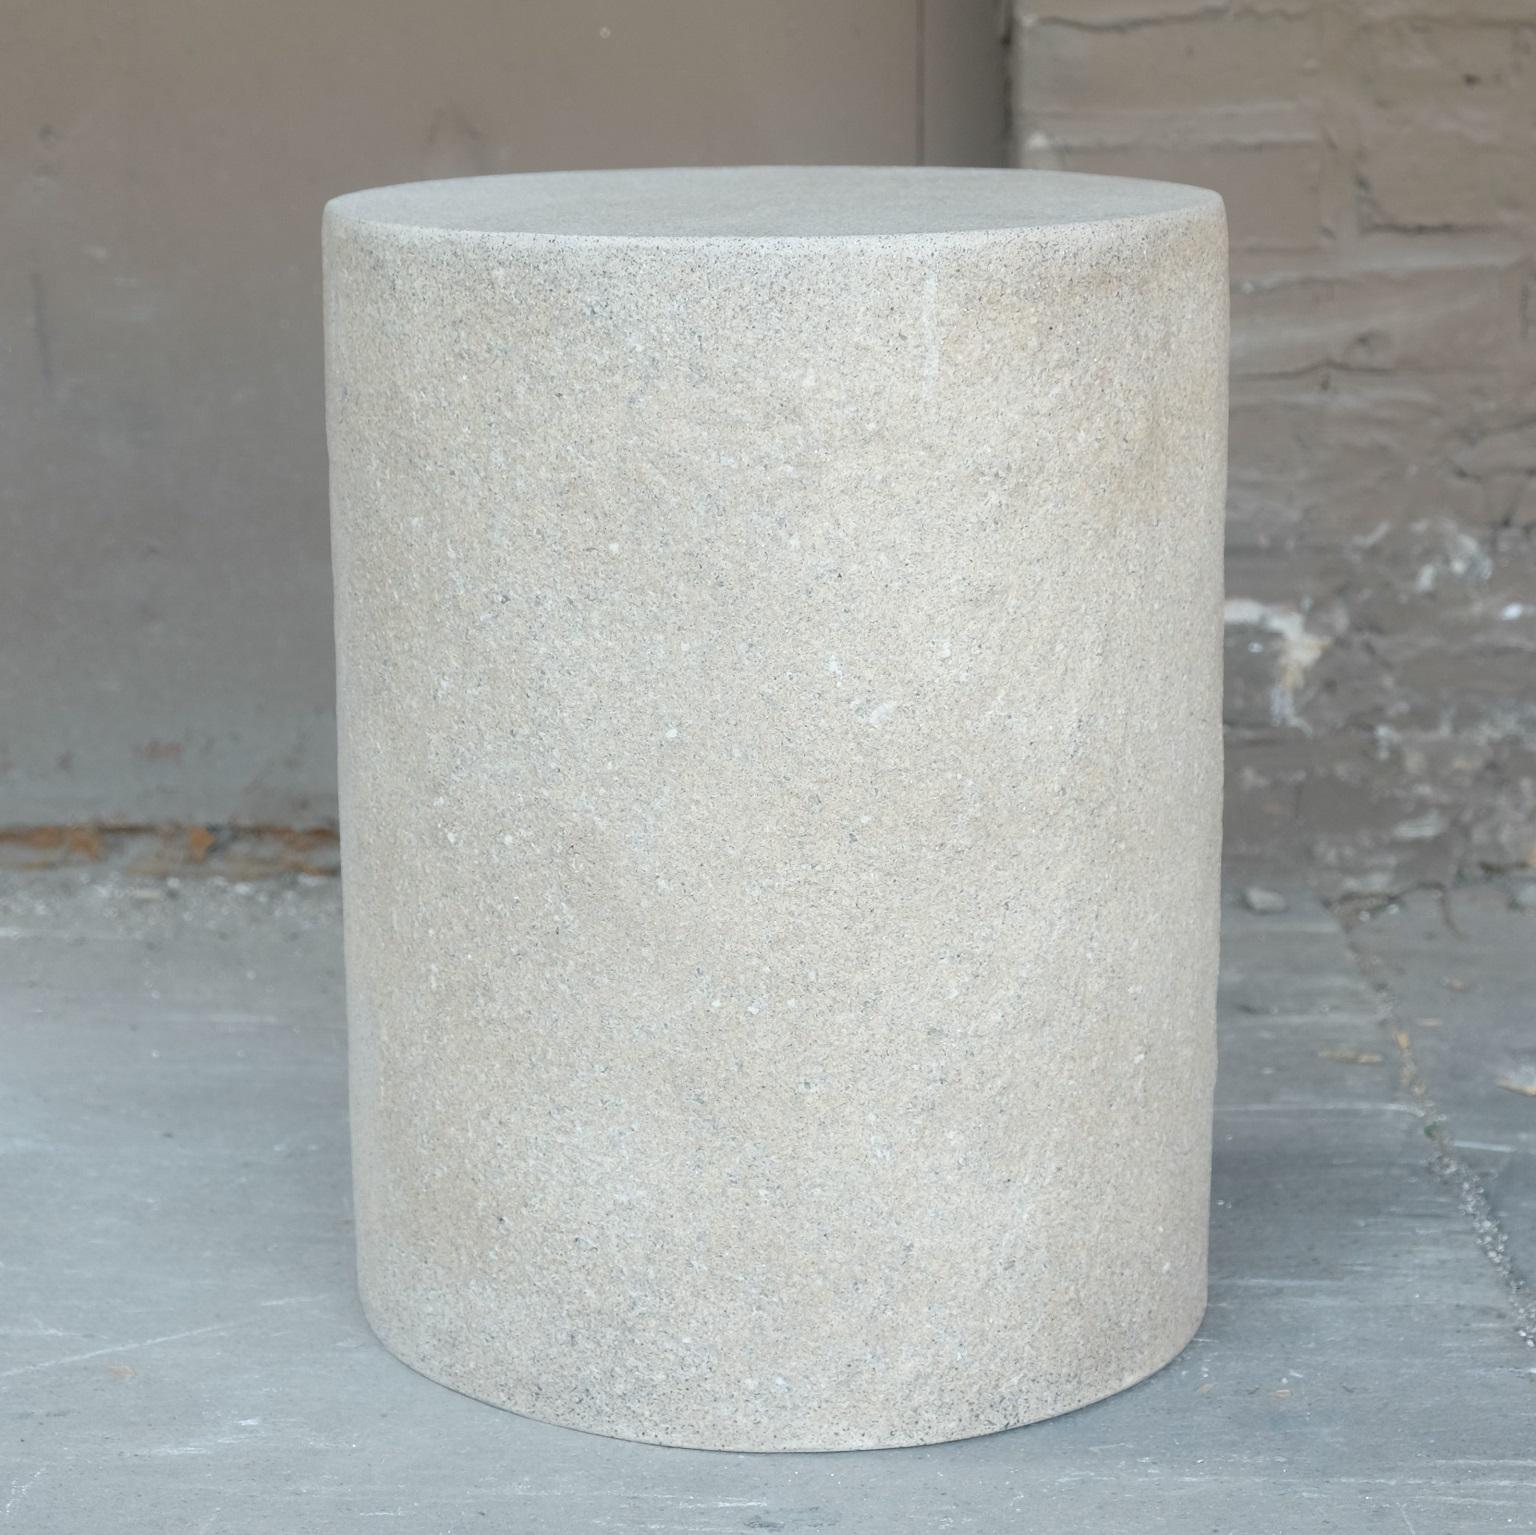 Seating that weathers the storm. A sturdy foundation softened by the rhythms of the coast. 

Dimensions: Diameter 14 in. (35.6 cm), height 18 in. (45.7 cm). Weight 20 lbs. (9 kg)

Finish color options:
White stone
Natural stone
Aged stone